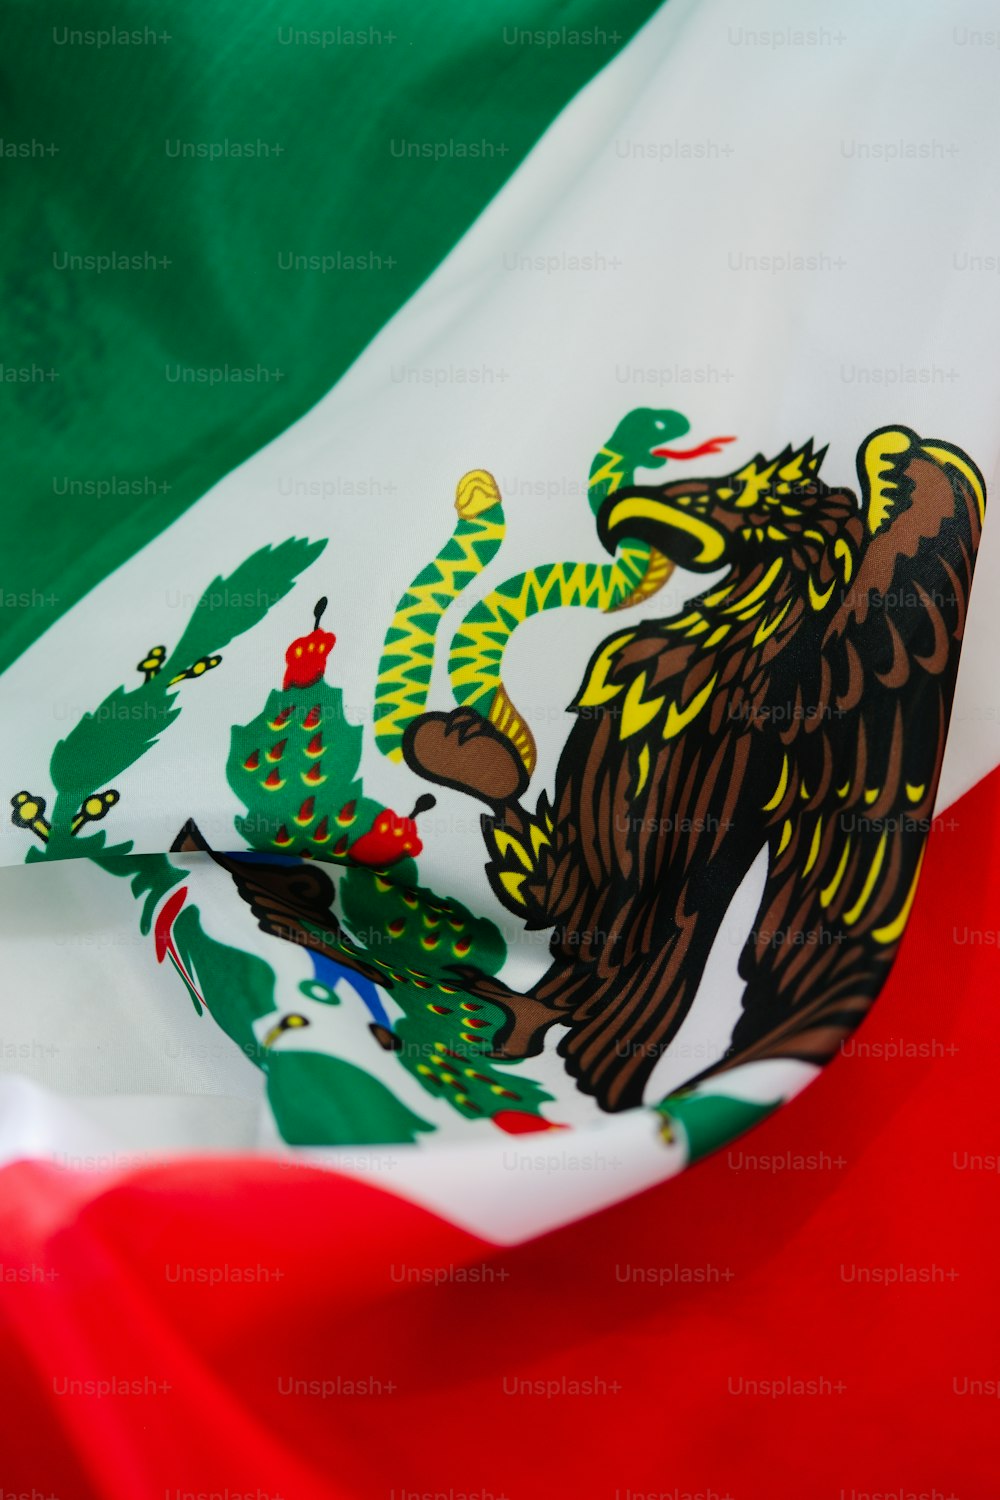 a close up of the flag of mexico